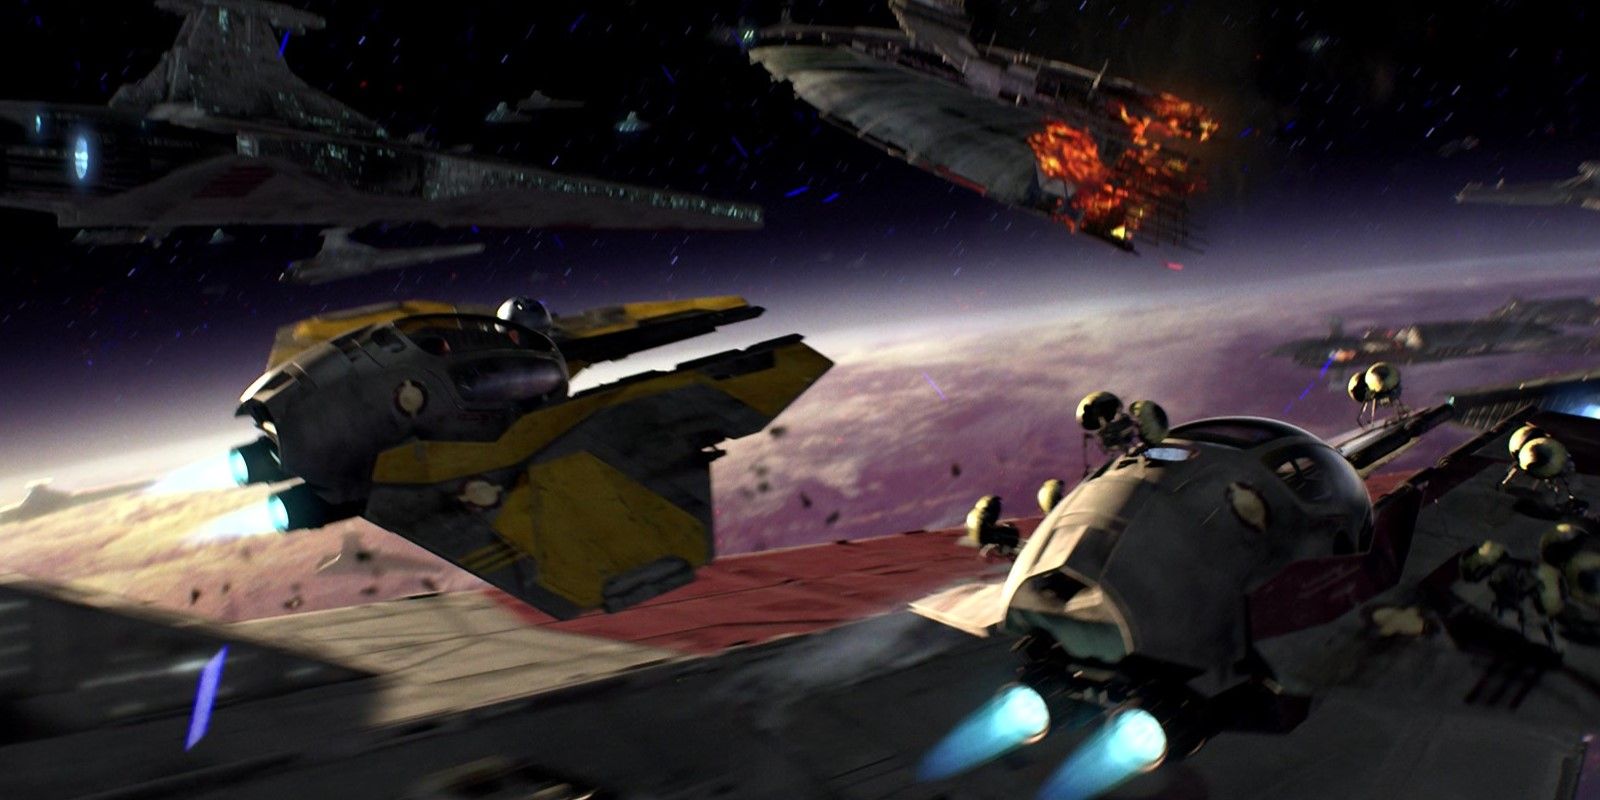 Anakin Skywalker and Obi-Wan Kenobi's Jedi starfighters during the Battle of Coruscant in Star Wars: Episode III - Revenge of the Sith